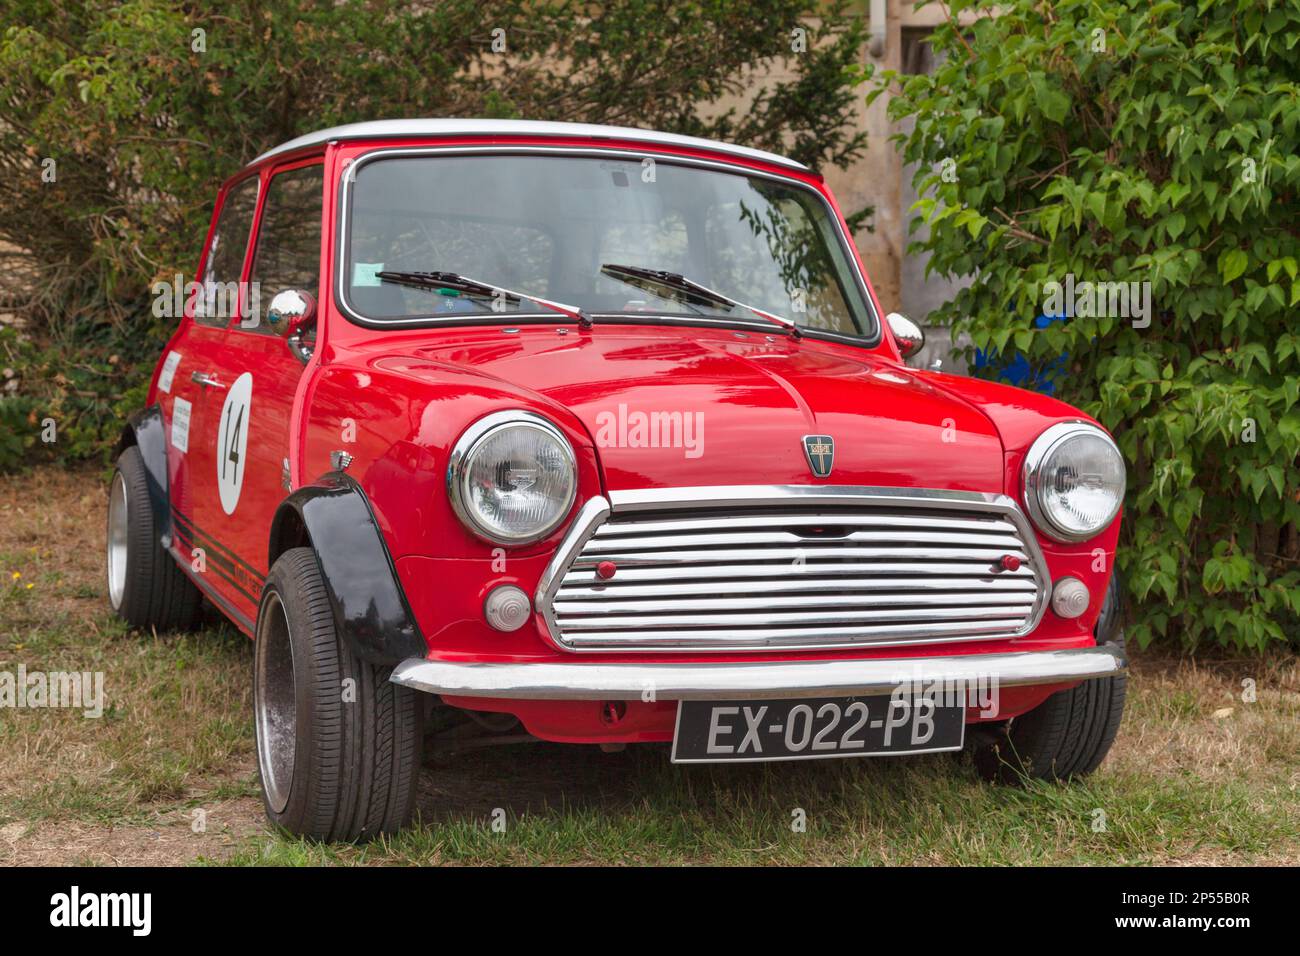 Lamorlaye, France - July 05 2020: The Mini is a small economy car produced since 1959 by the English-based British Motor Corporation (BMC) and its suc Stock Photo